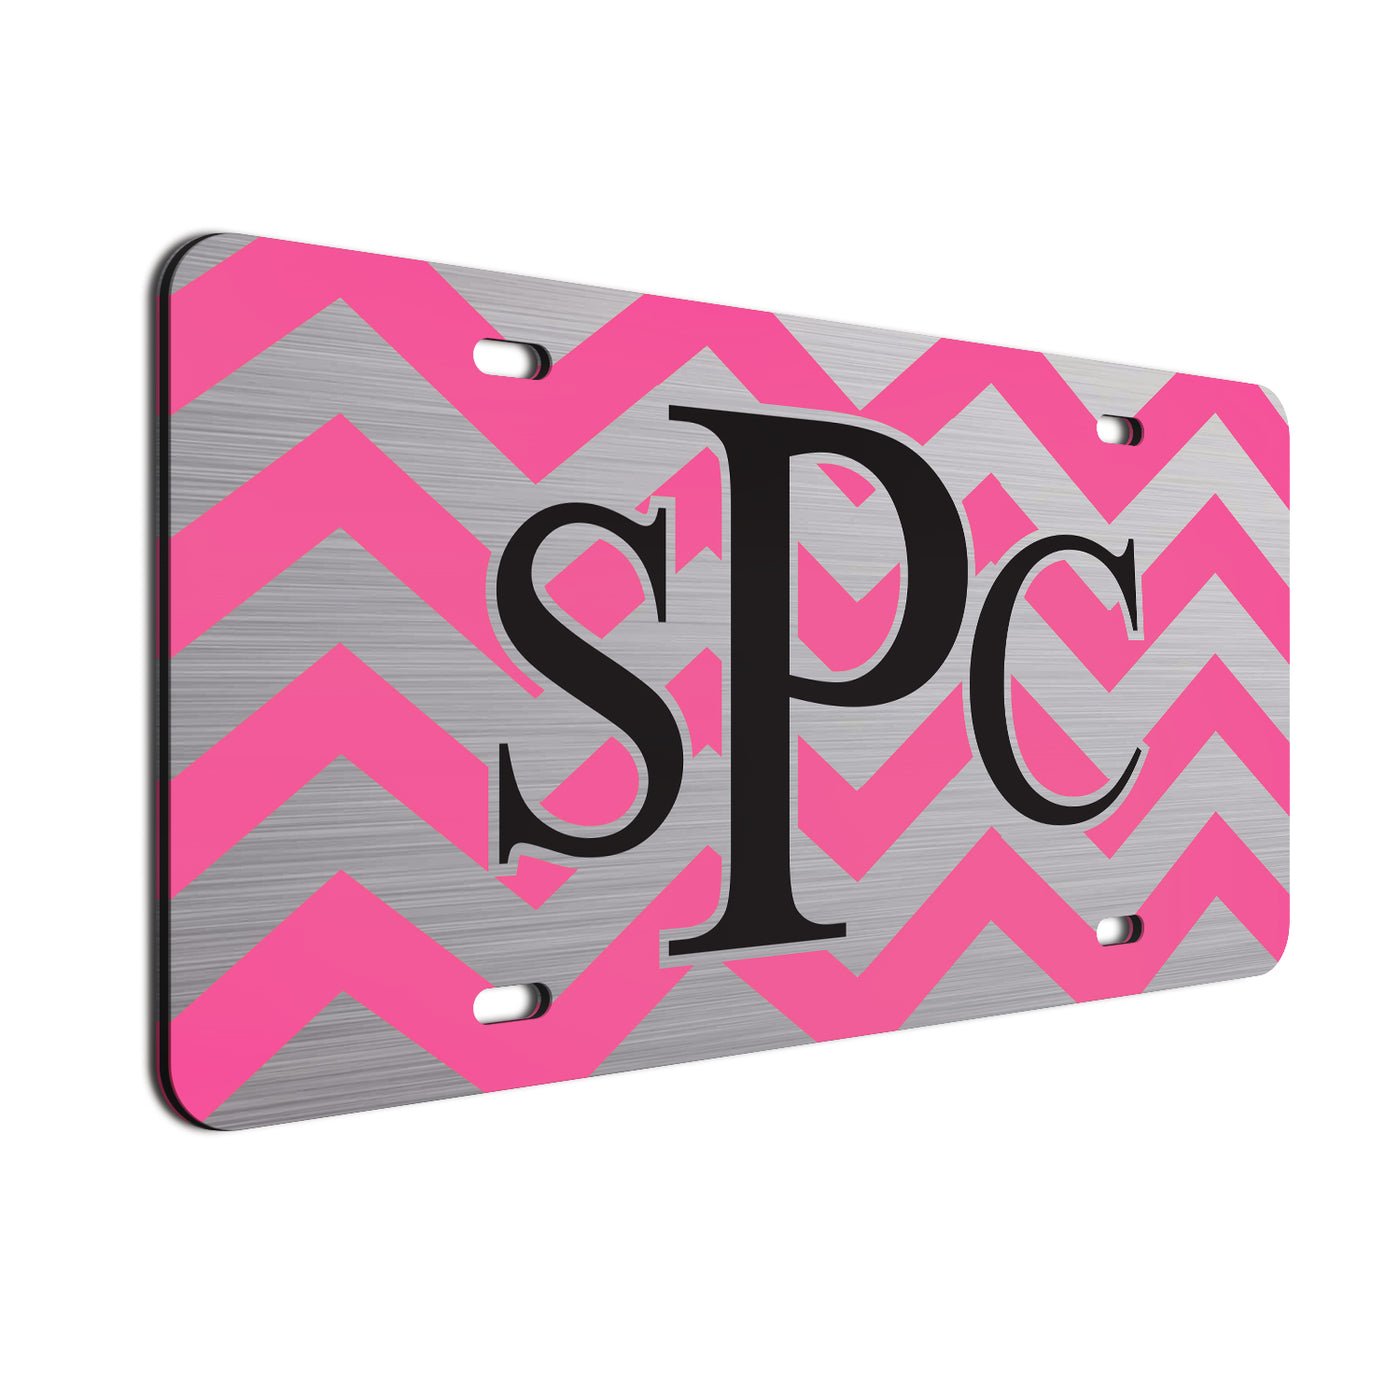 Chevron Bold Text License Plate  Pink